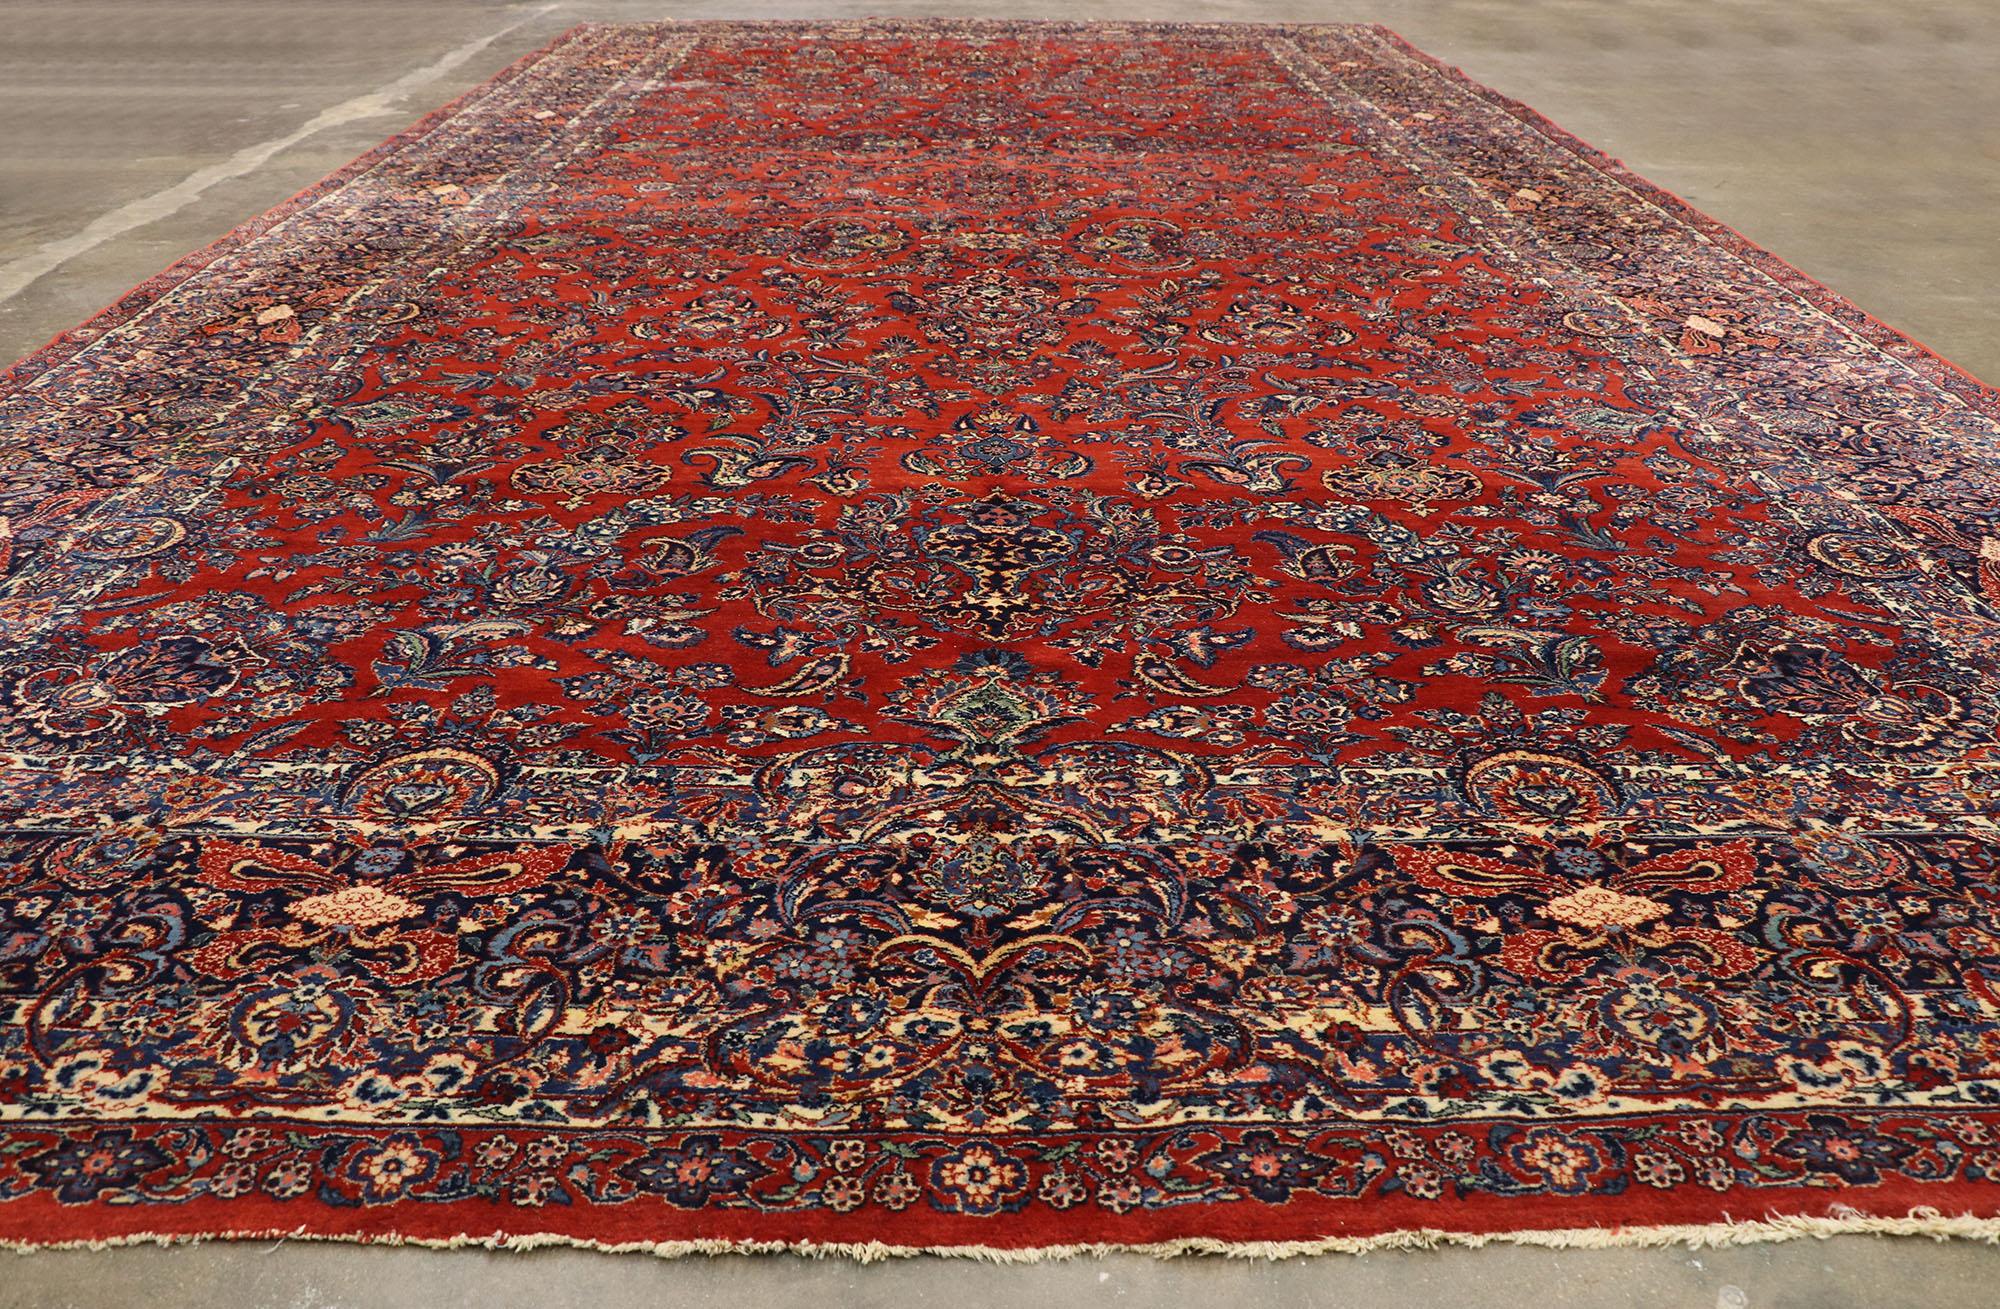 Wool 1890s Oversized Antique Persian Qazvin Rug, Hotel Lobby Size Carpet For Sale